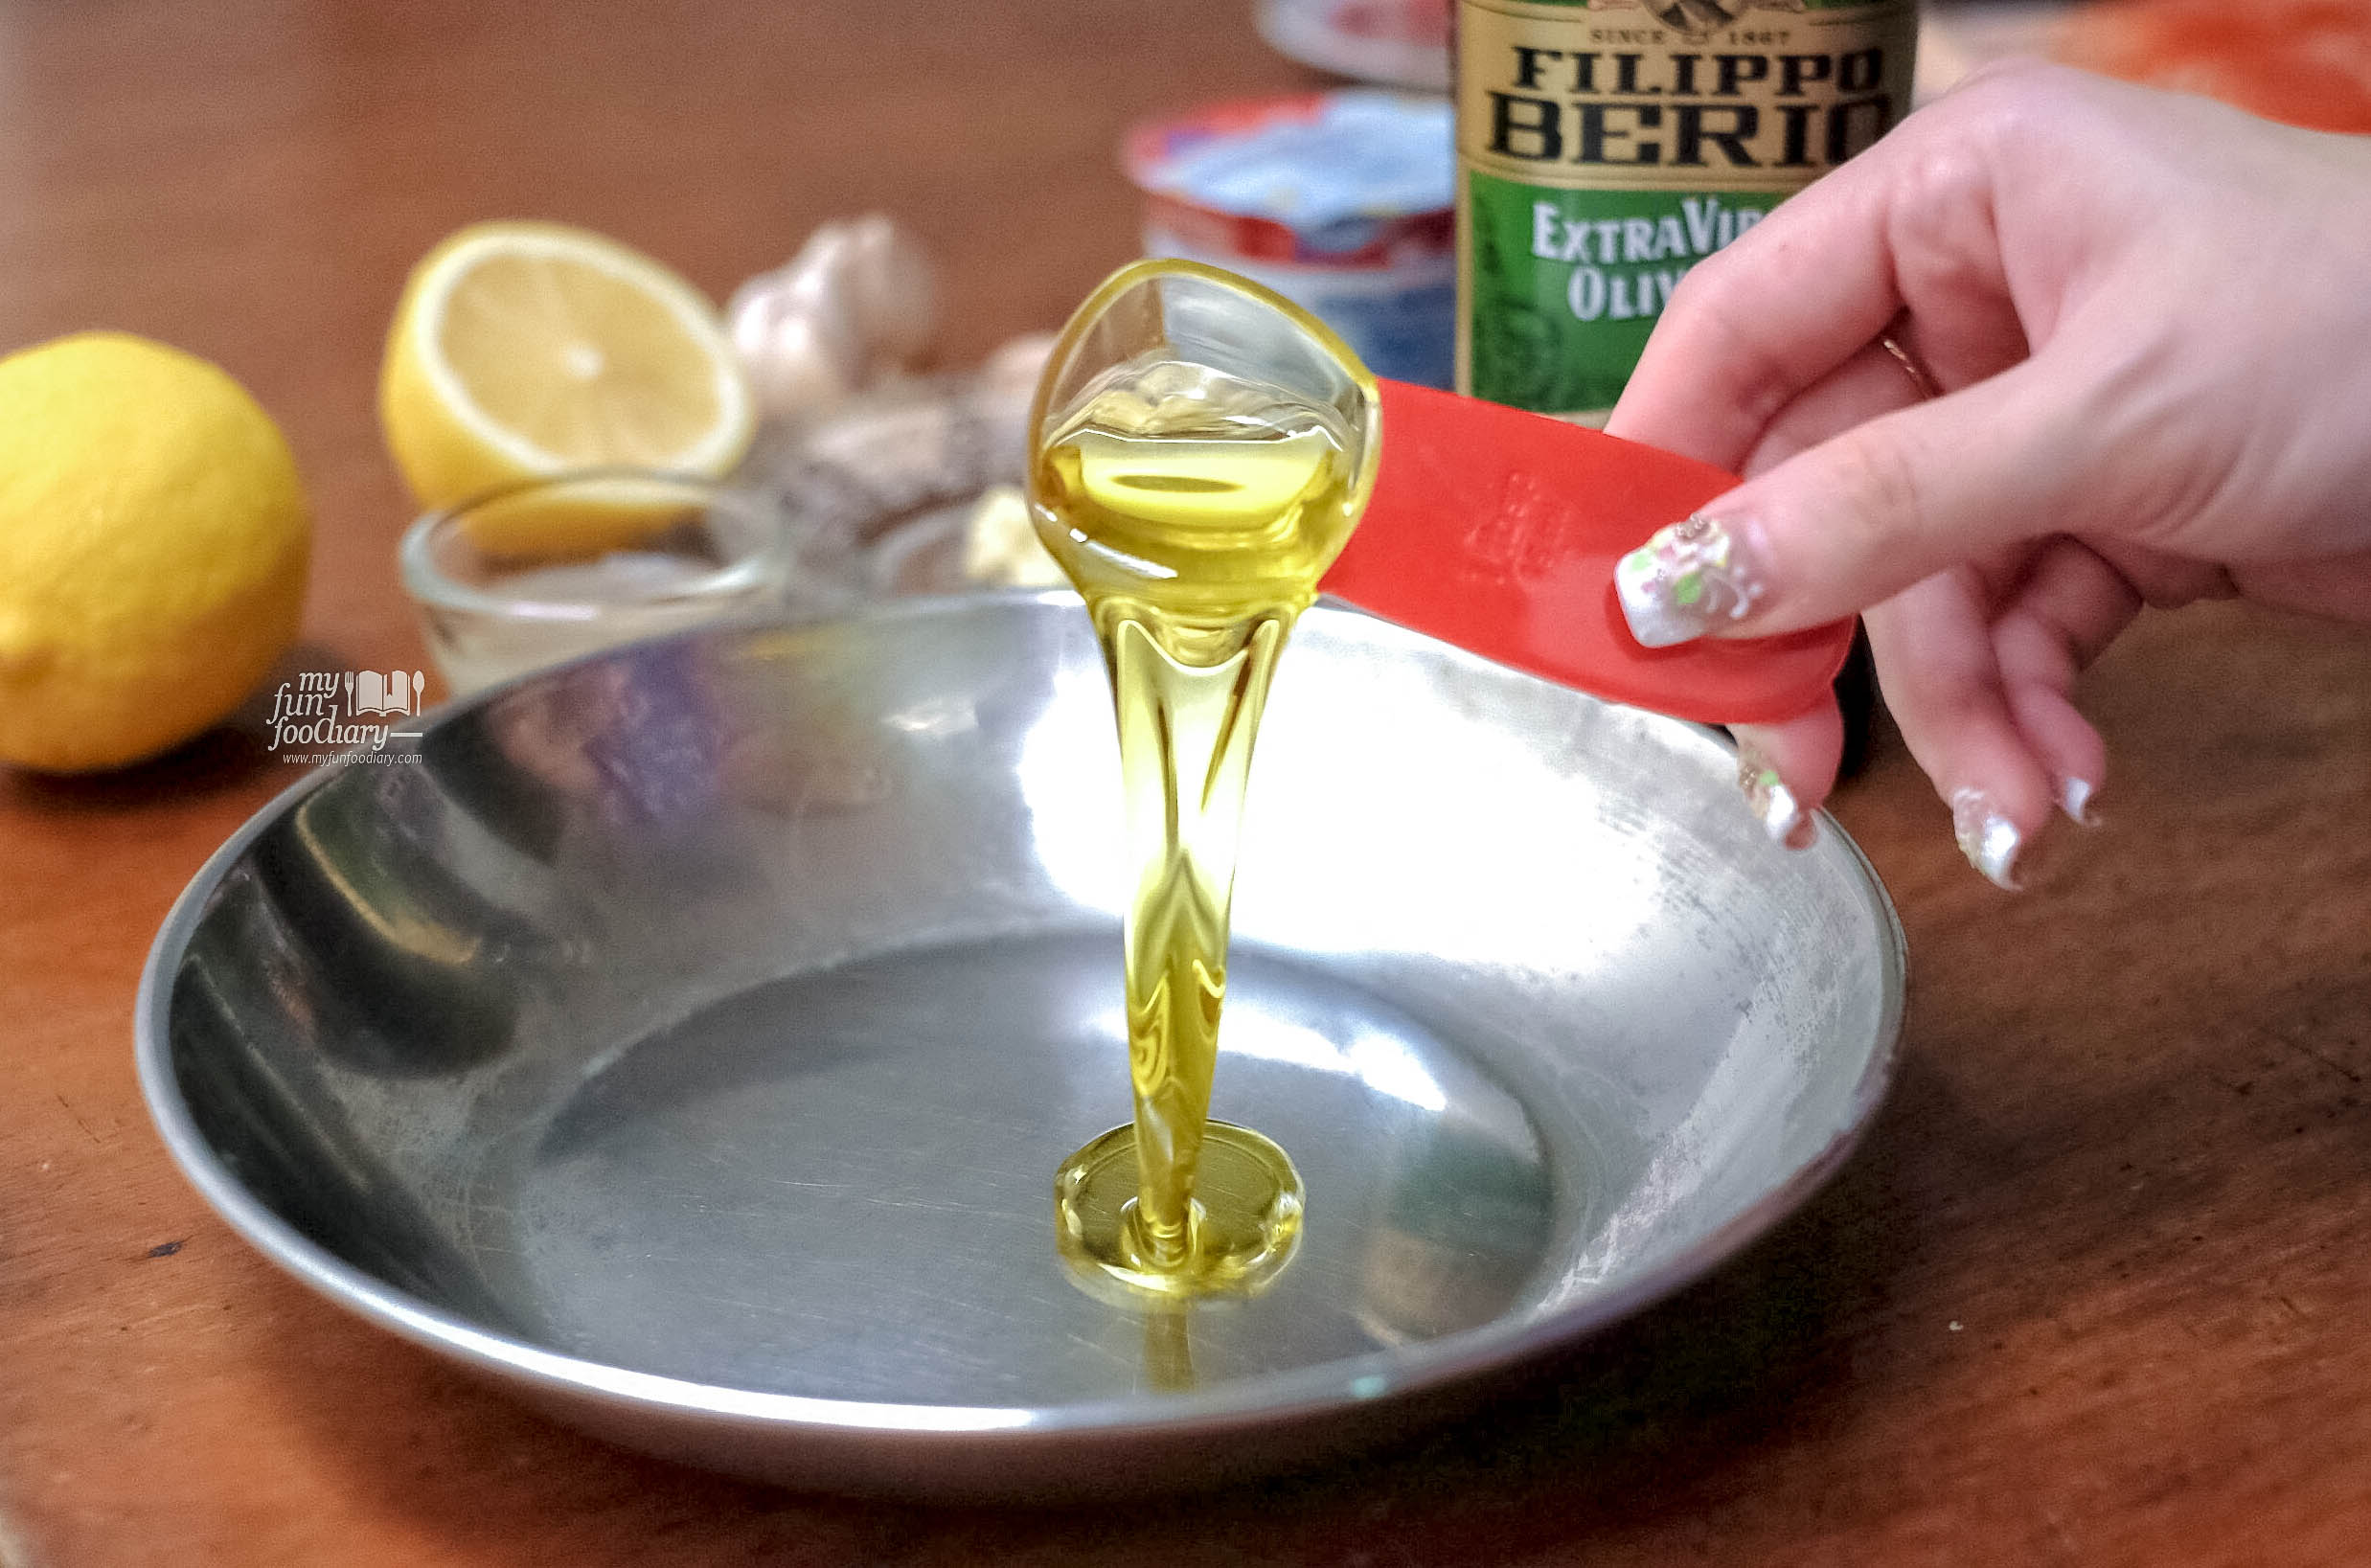 Clear olive oil - Filippo Berio by Myfunfoodiary